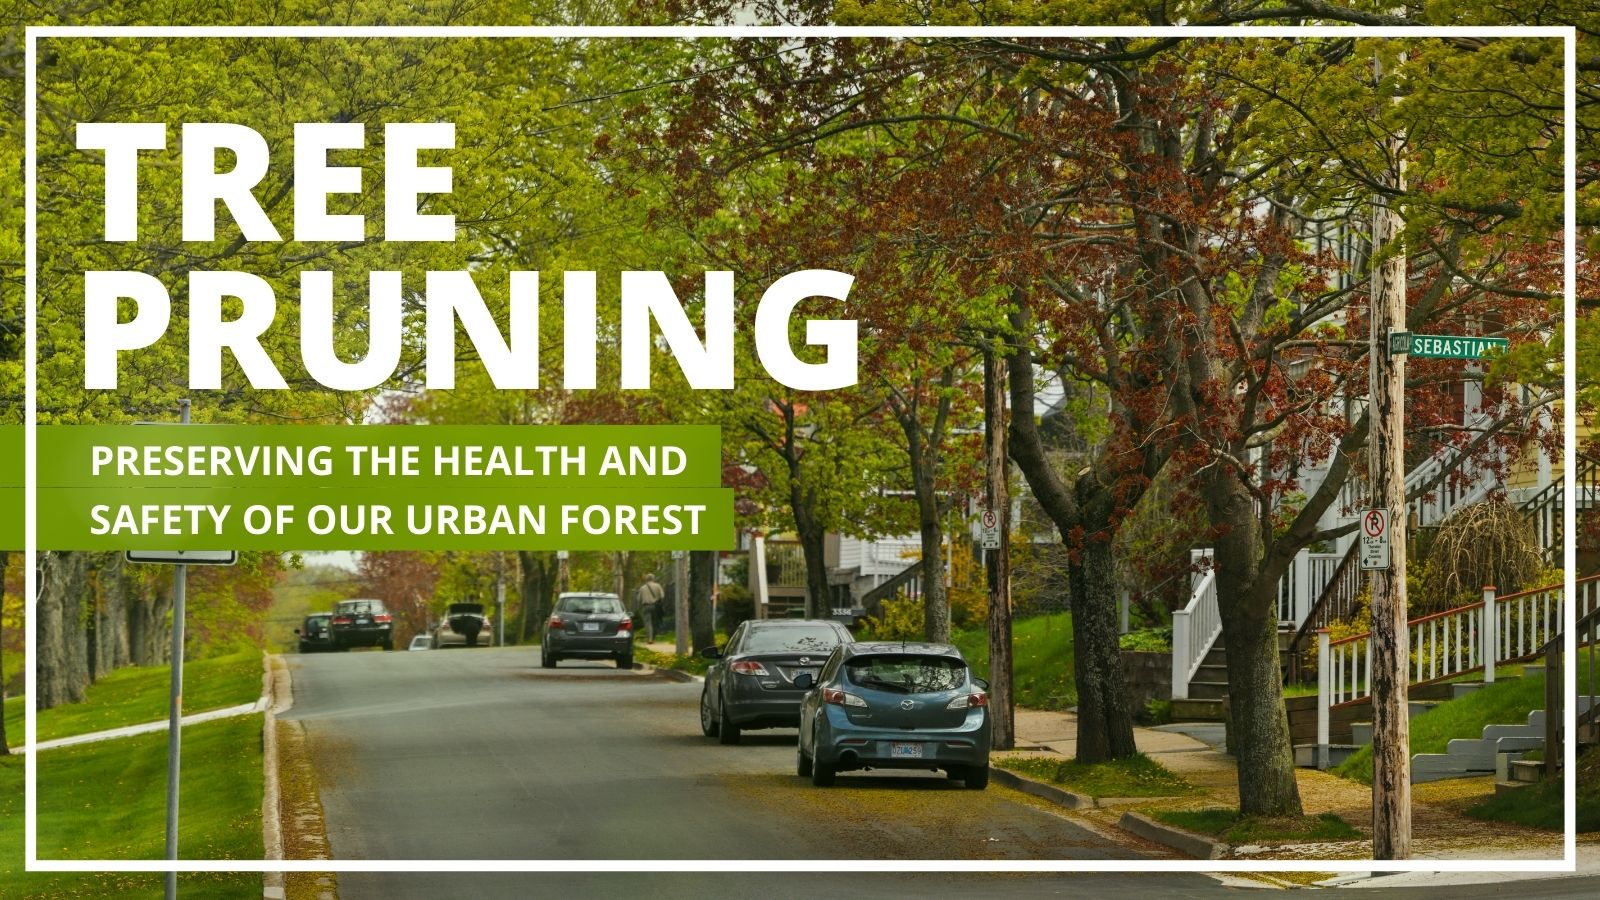 the words "tree pruning, preserving the health and safety of our urban forest" over an image of a street lined with trees and parked cars. 